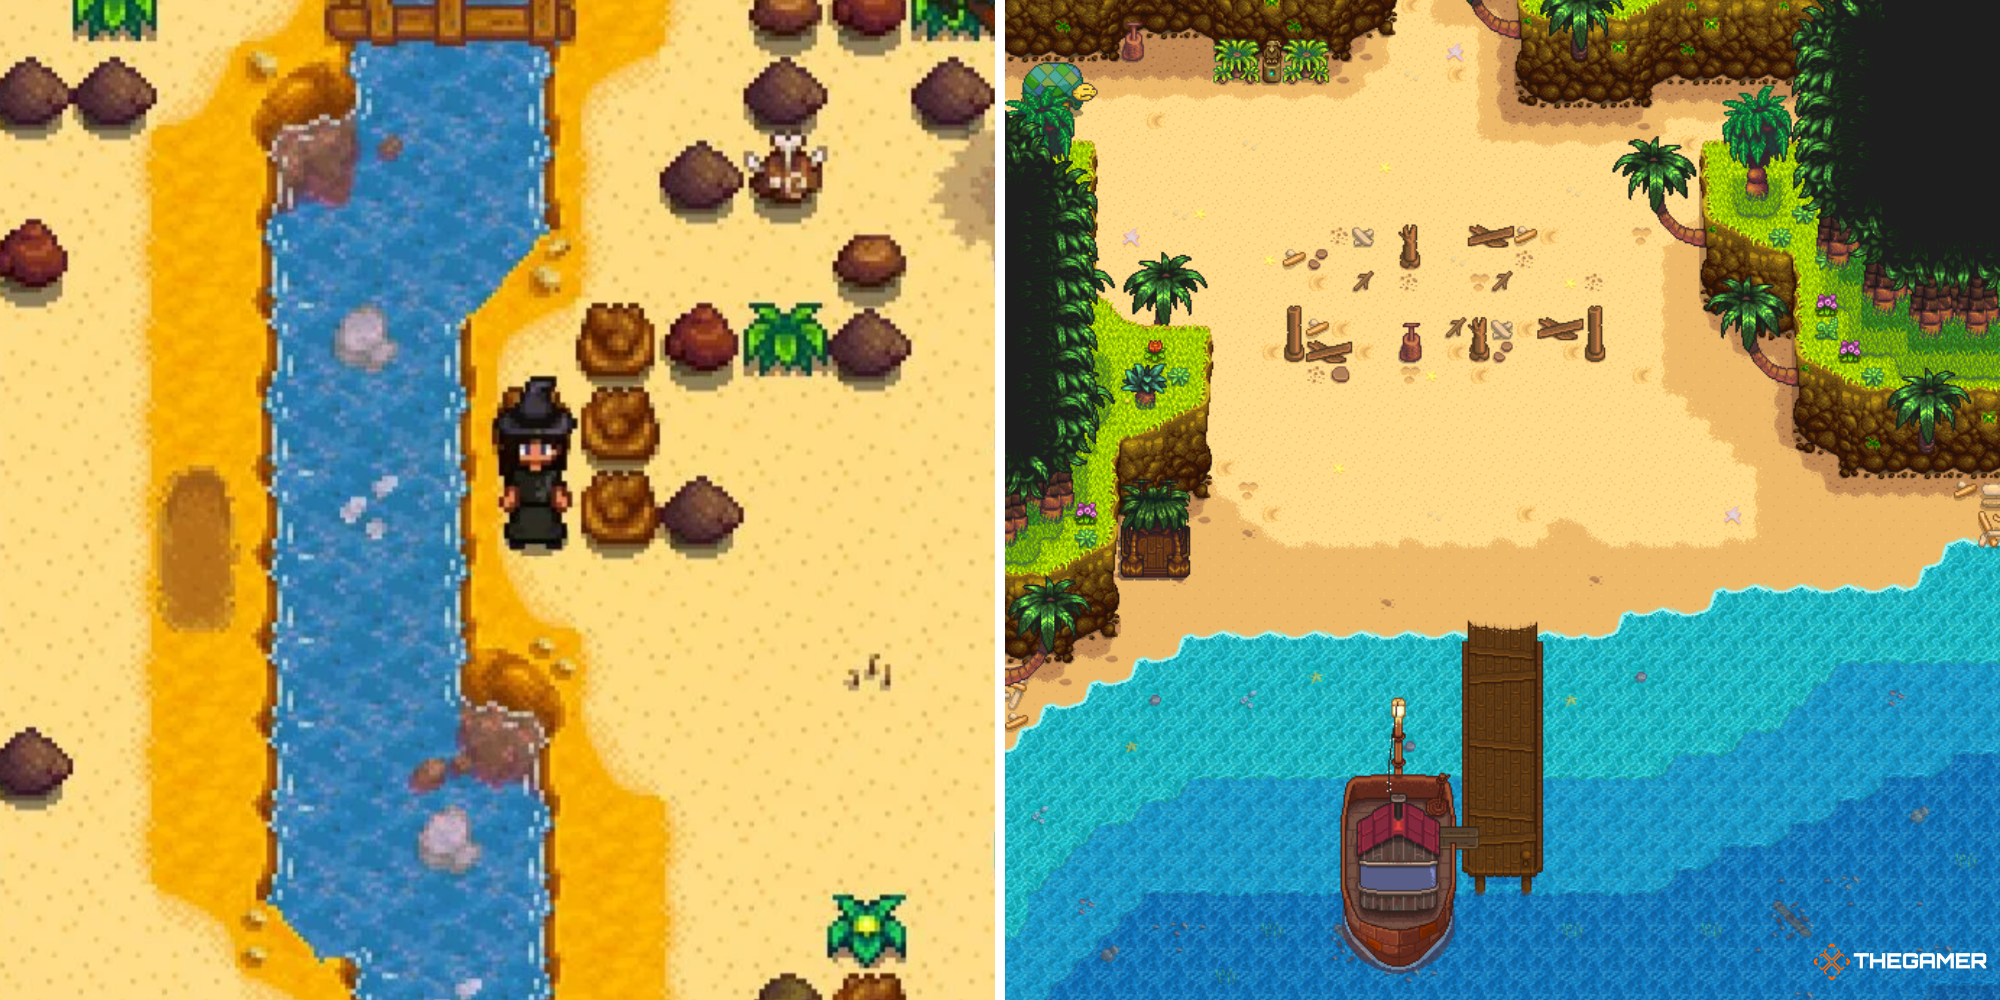 Stardew Valley Ginger Island - Island south on right, Dig site river on left